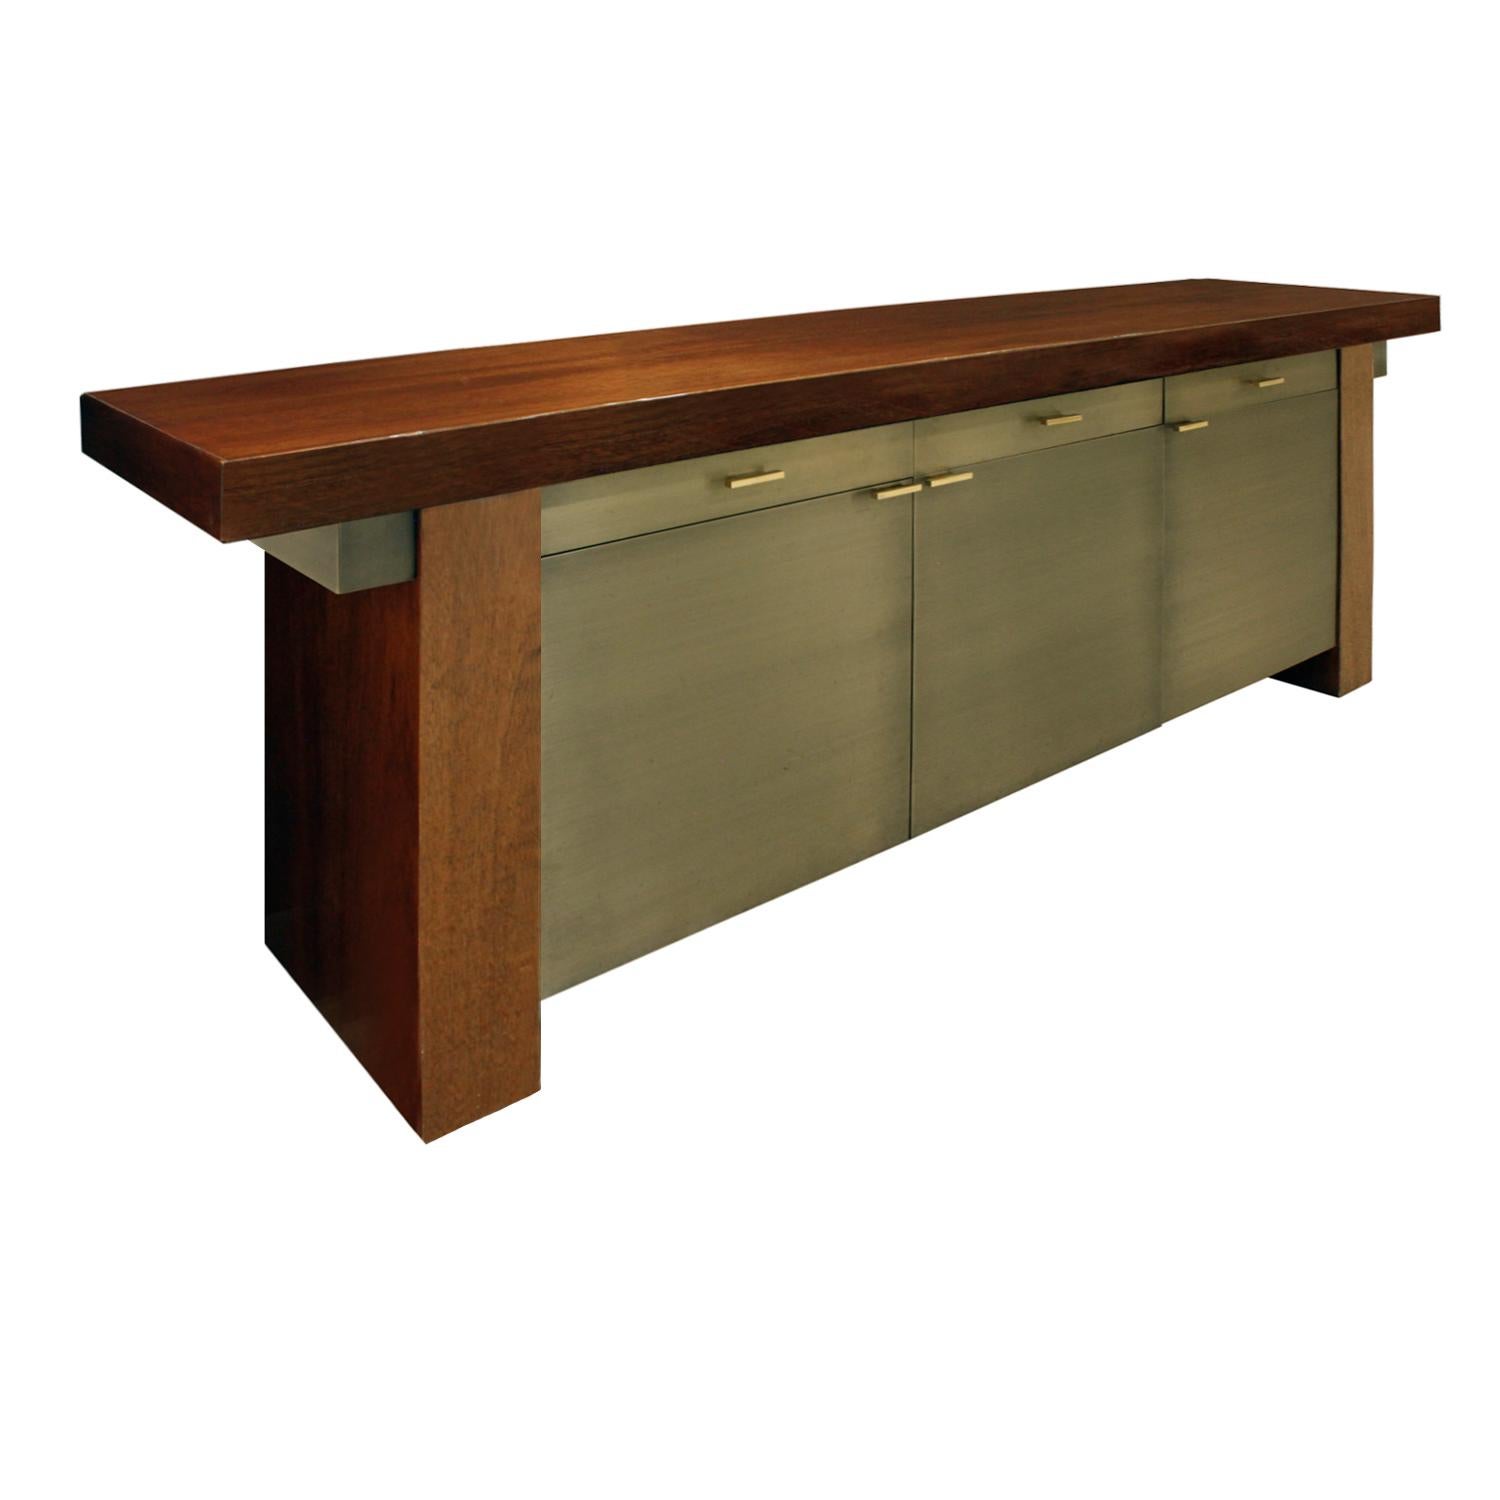 American Karl Springer Credenza in Lacquered Mahogany with Oxidized Bronze Doors, 1980s